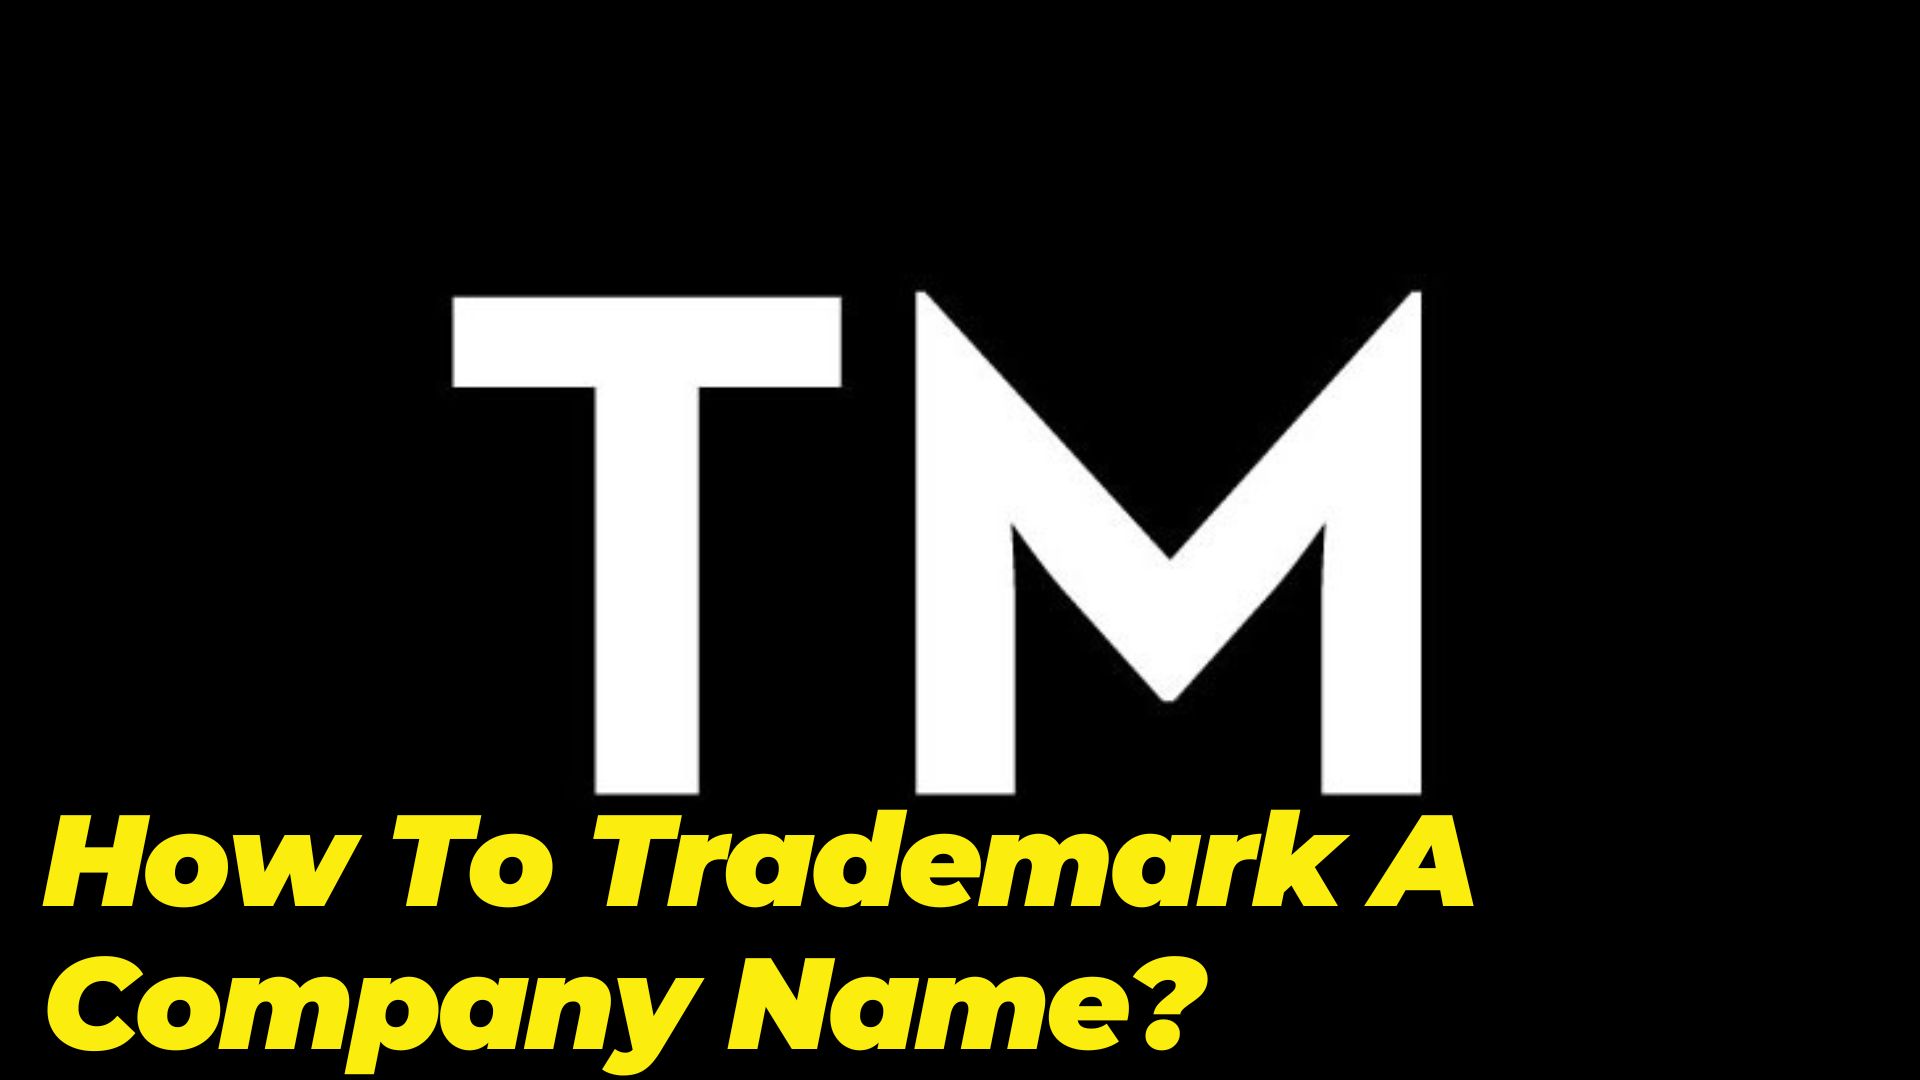 How To Trademark A Company Name?